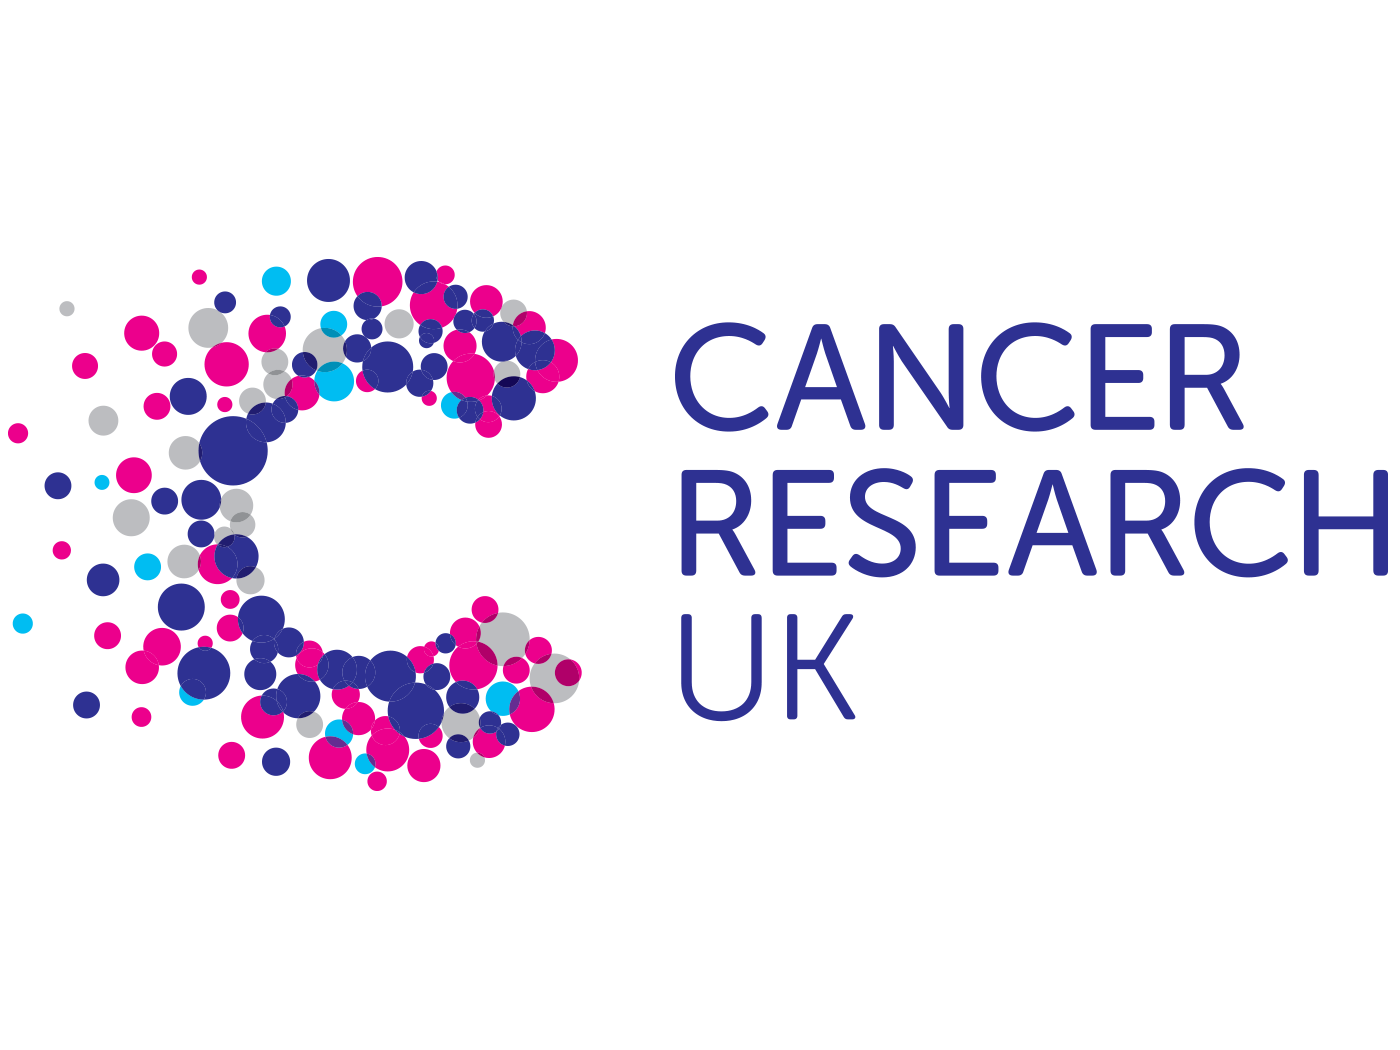 Cancer Research logo